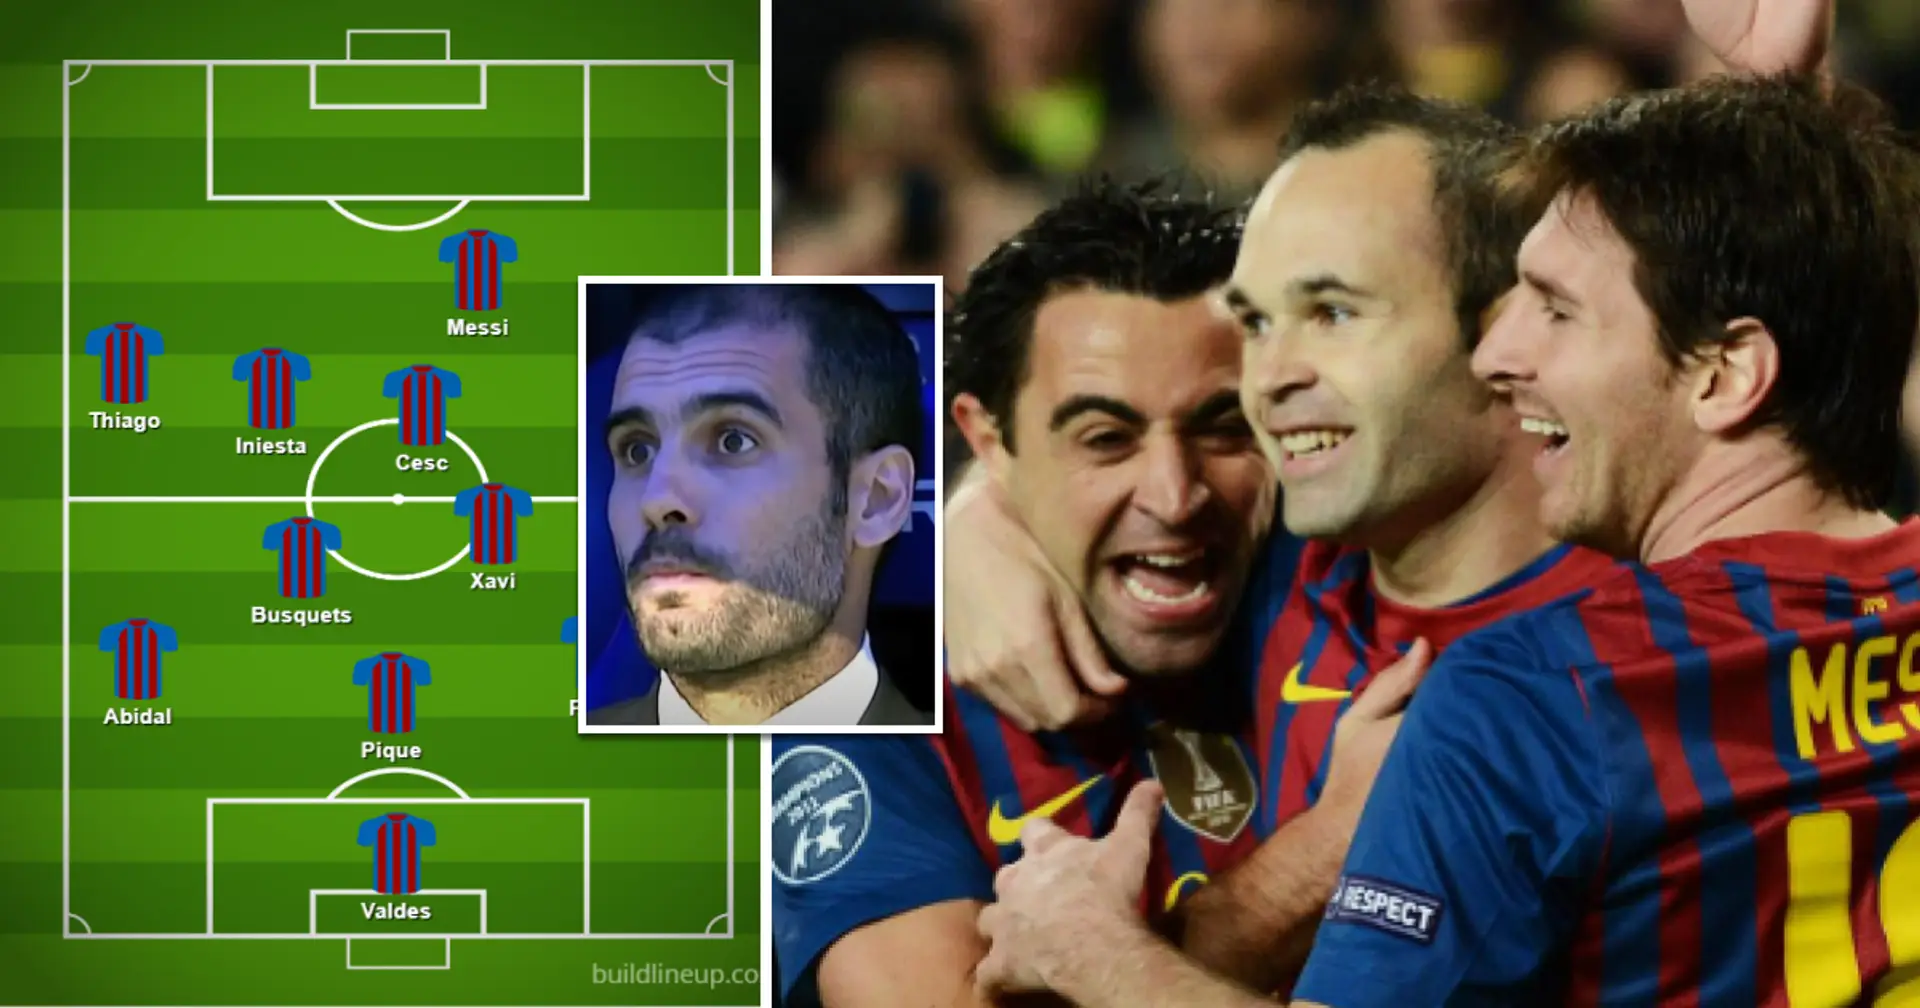 2 games Pep Guardiola names as his favourite in charge of iconic Barca - not vs Madrid or United